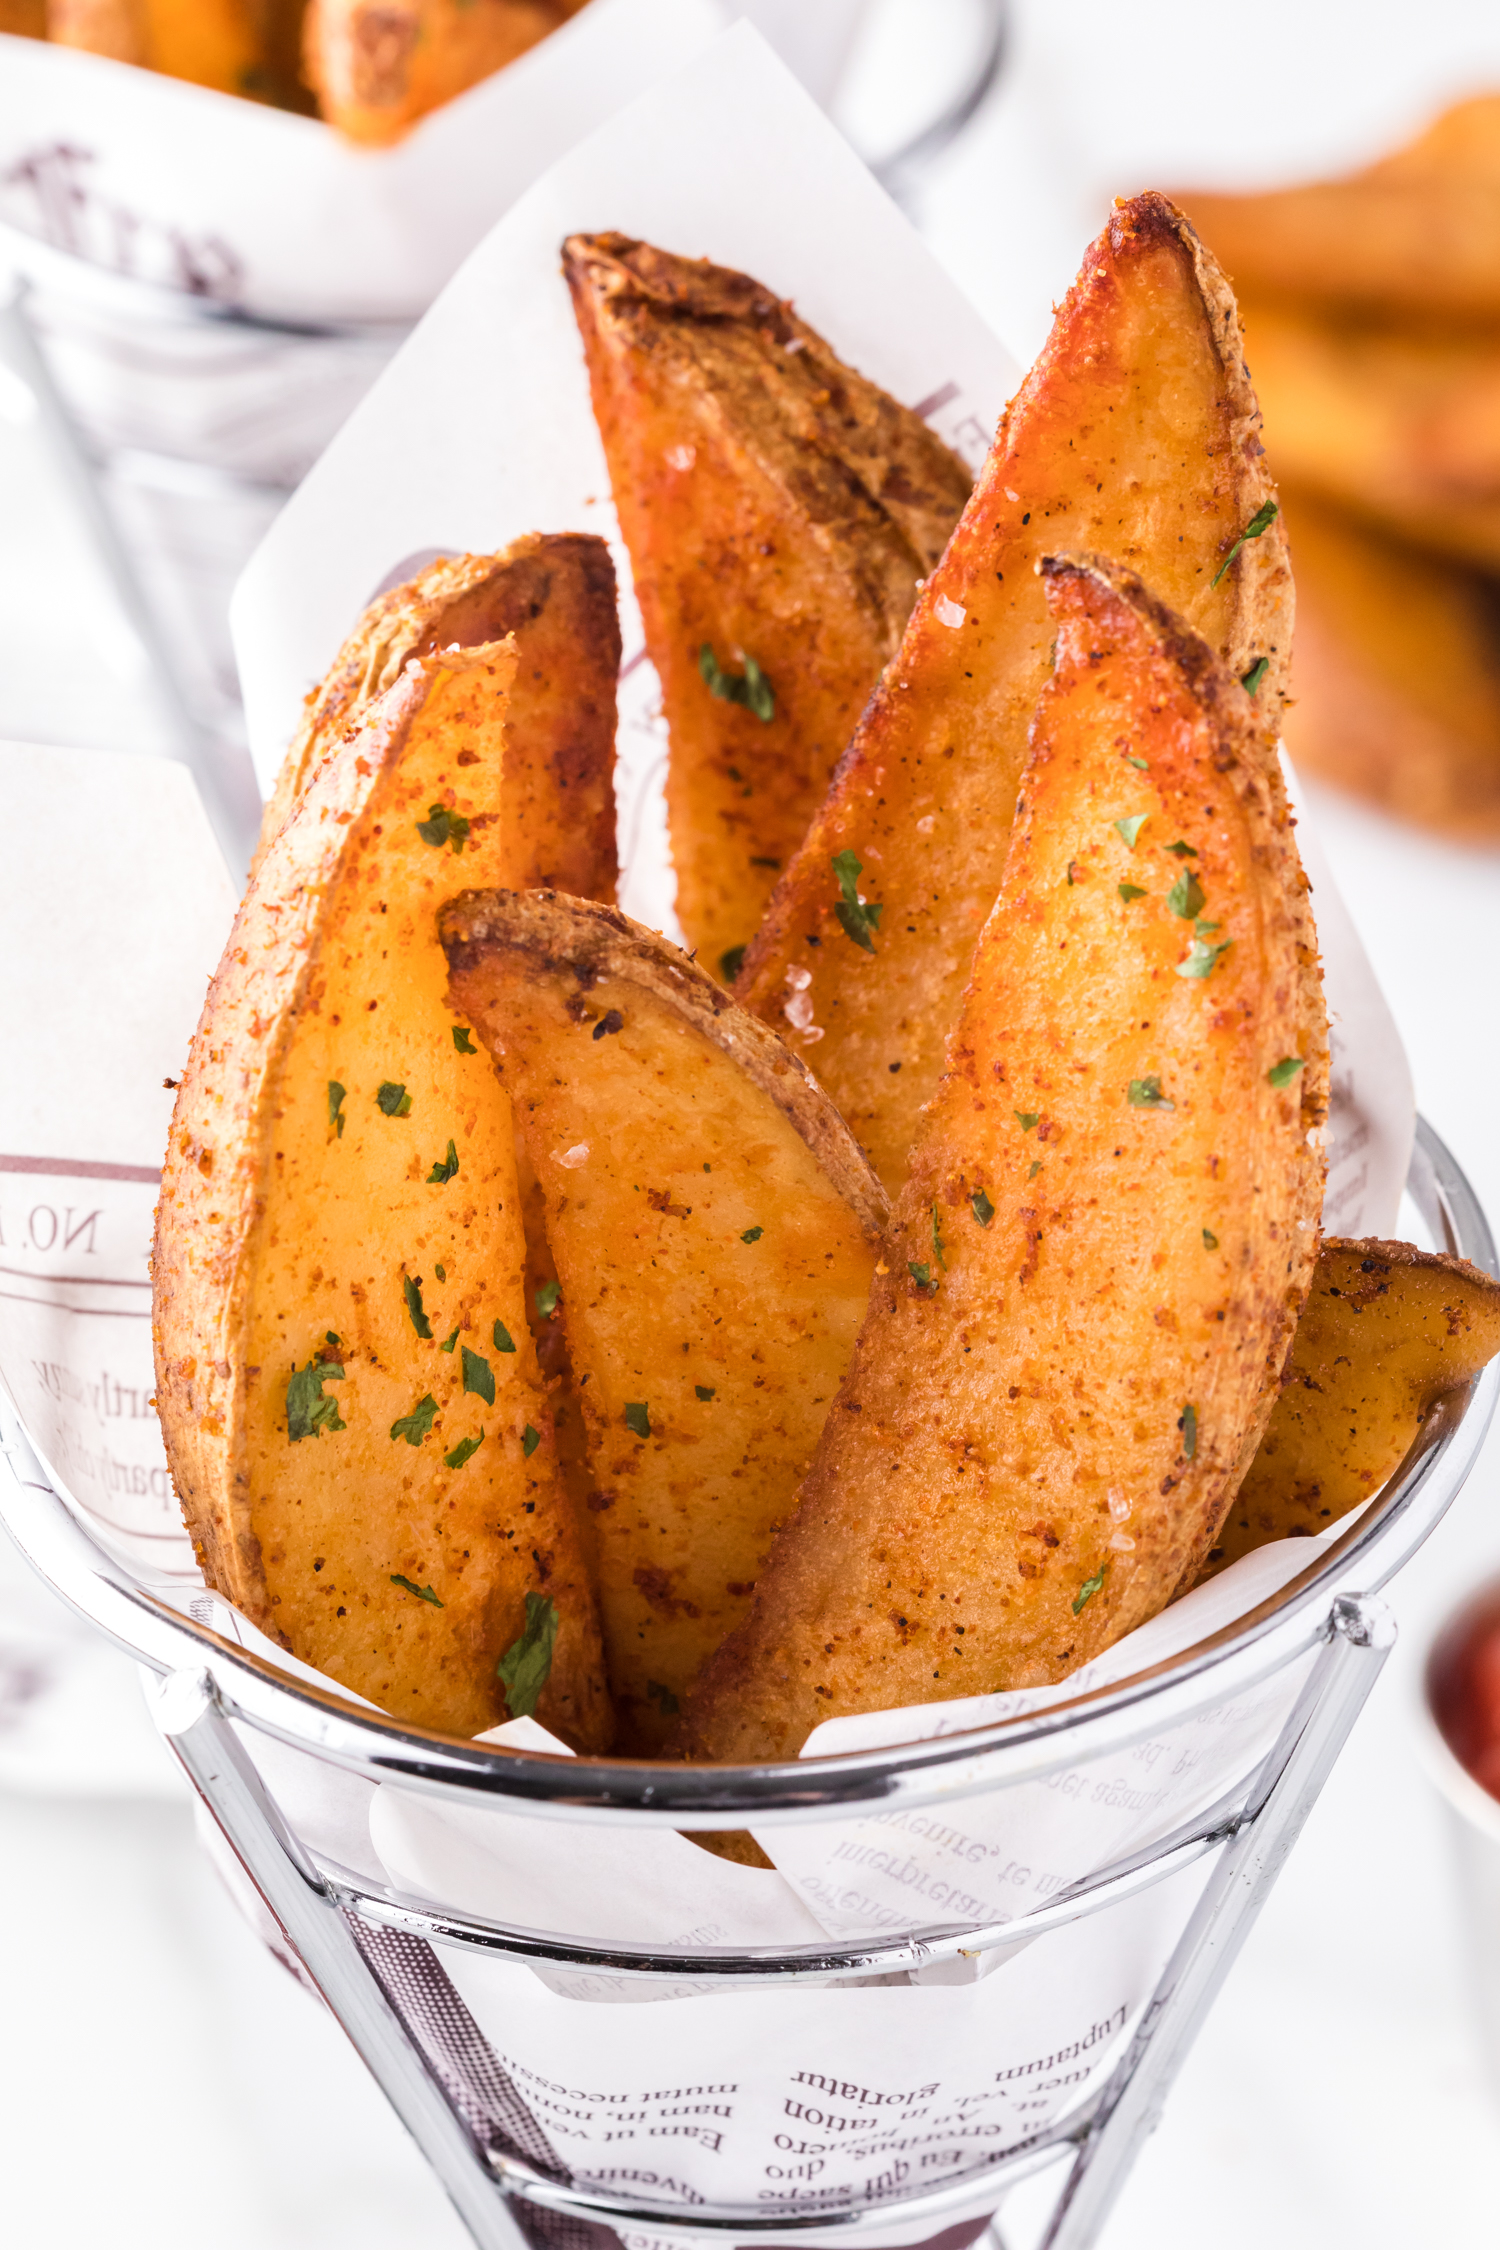 Potato wedges in a cone shaped basket.